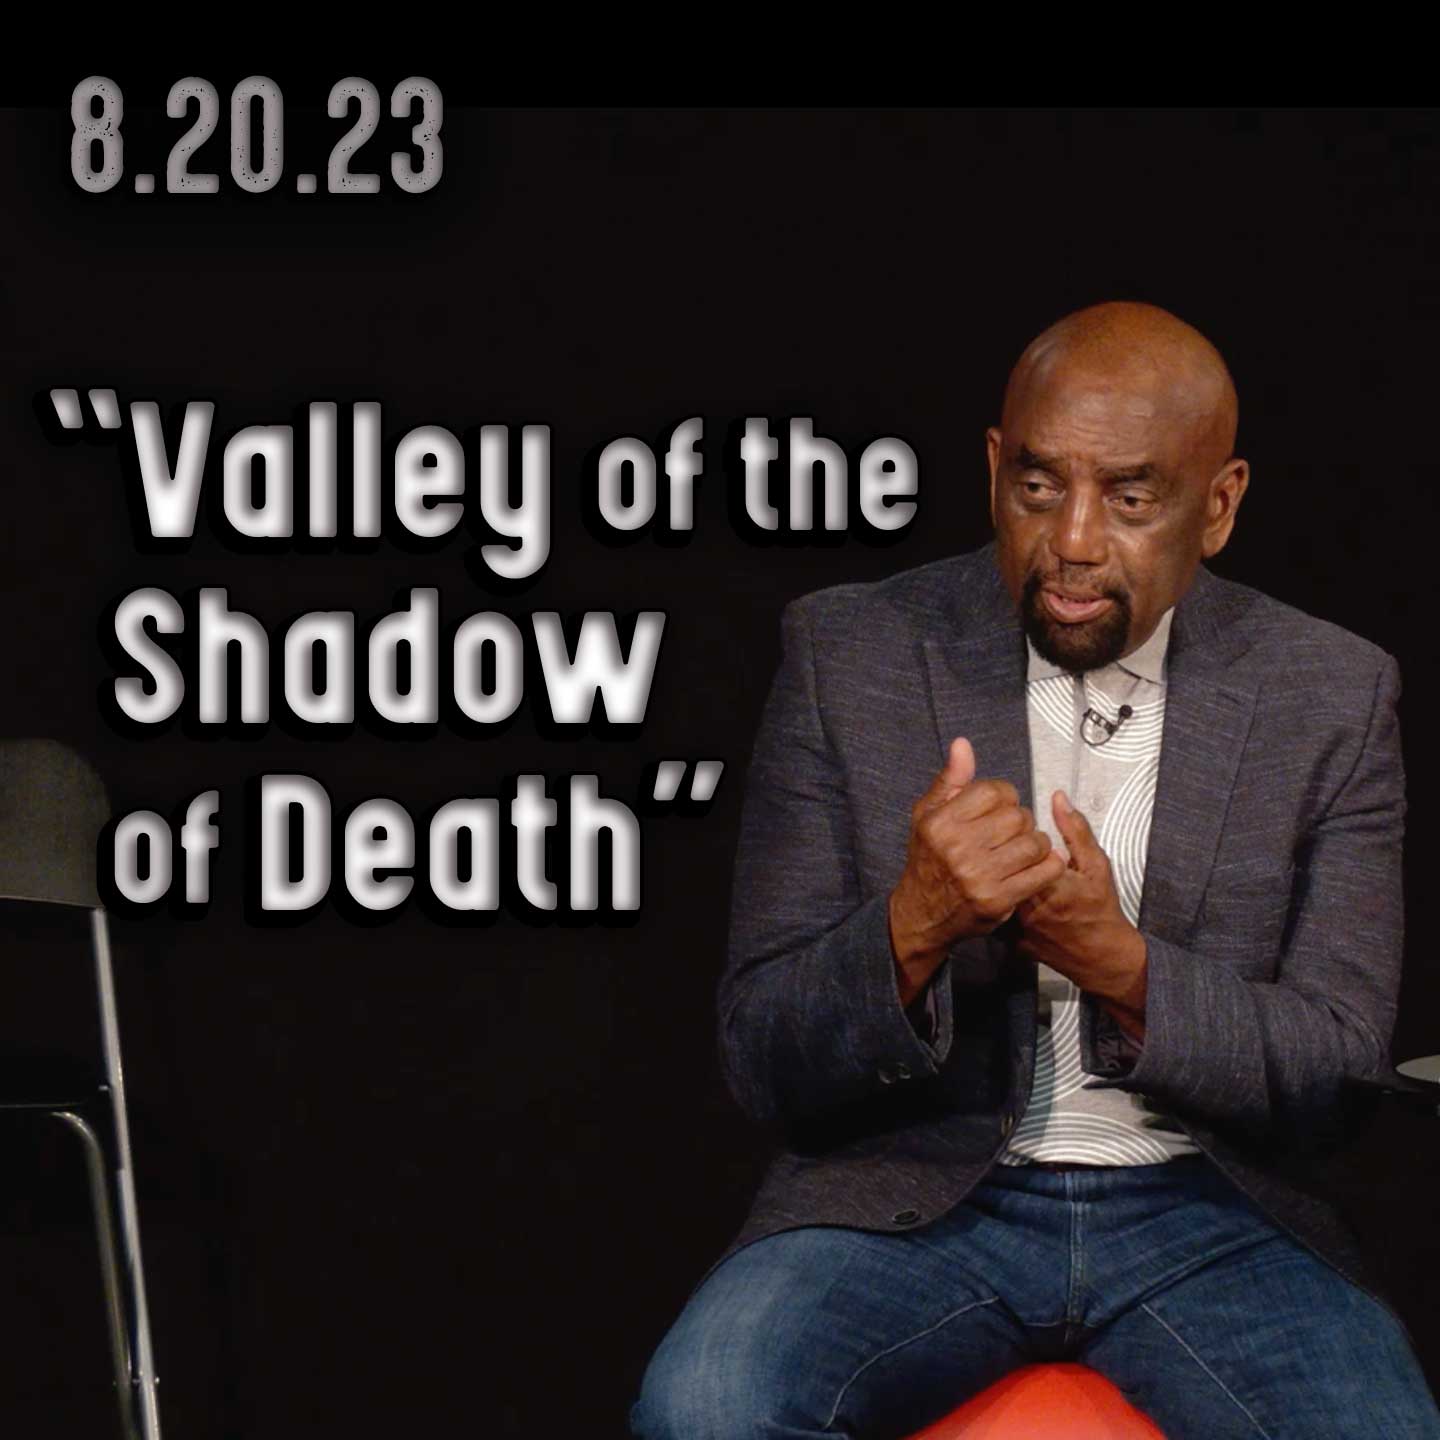 Are You in Control of Your Life? Church 8/20/23 ("Valley of the Shadow of Death")